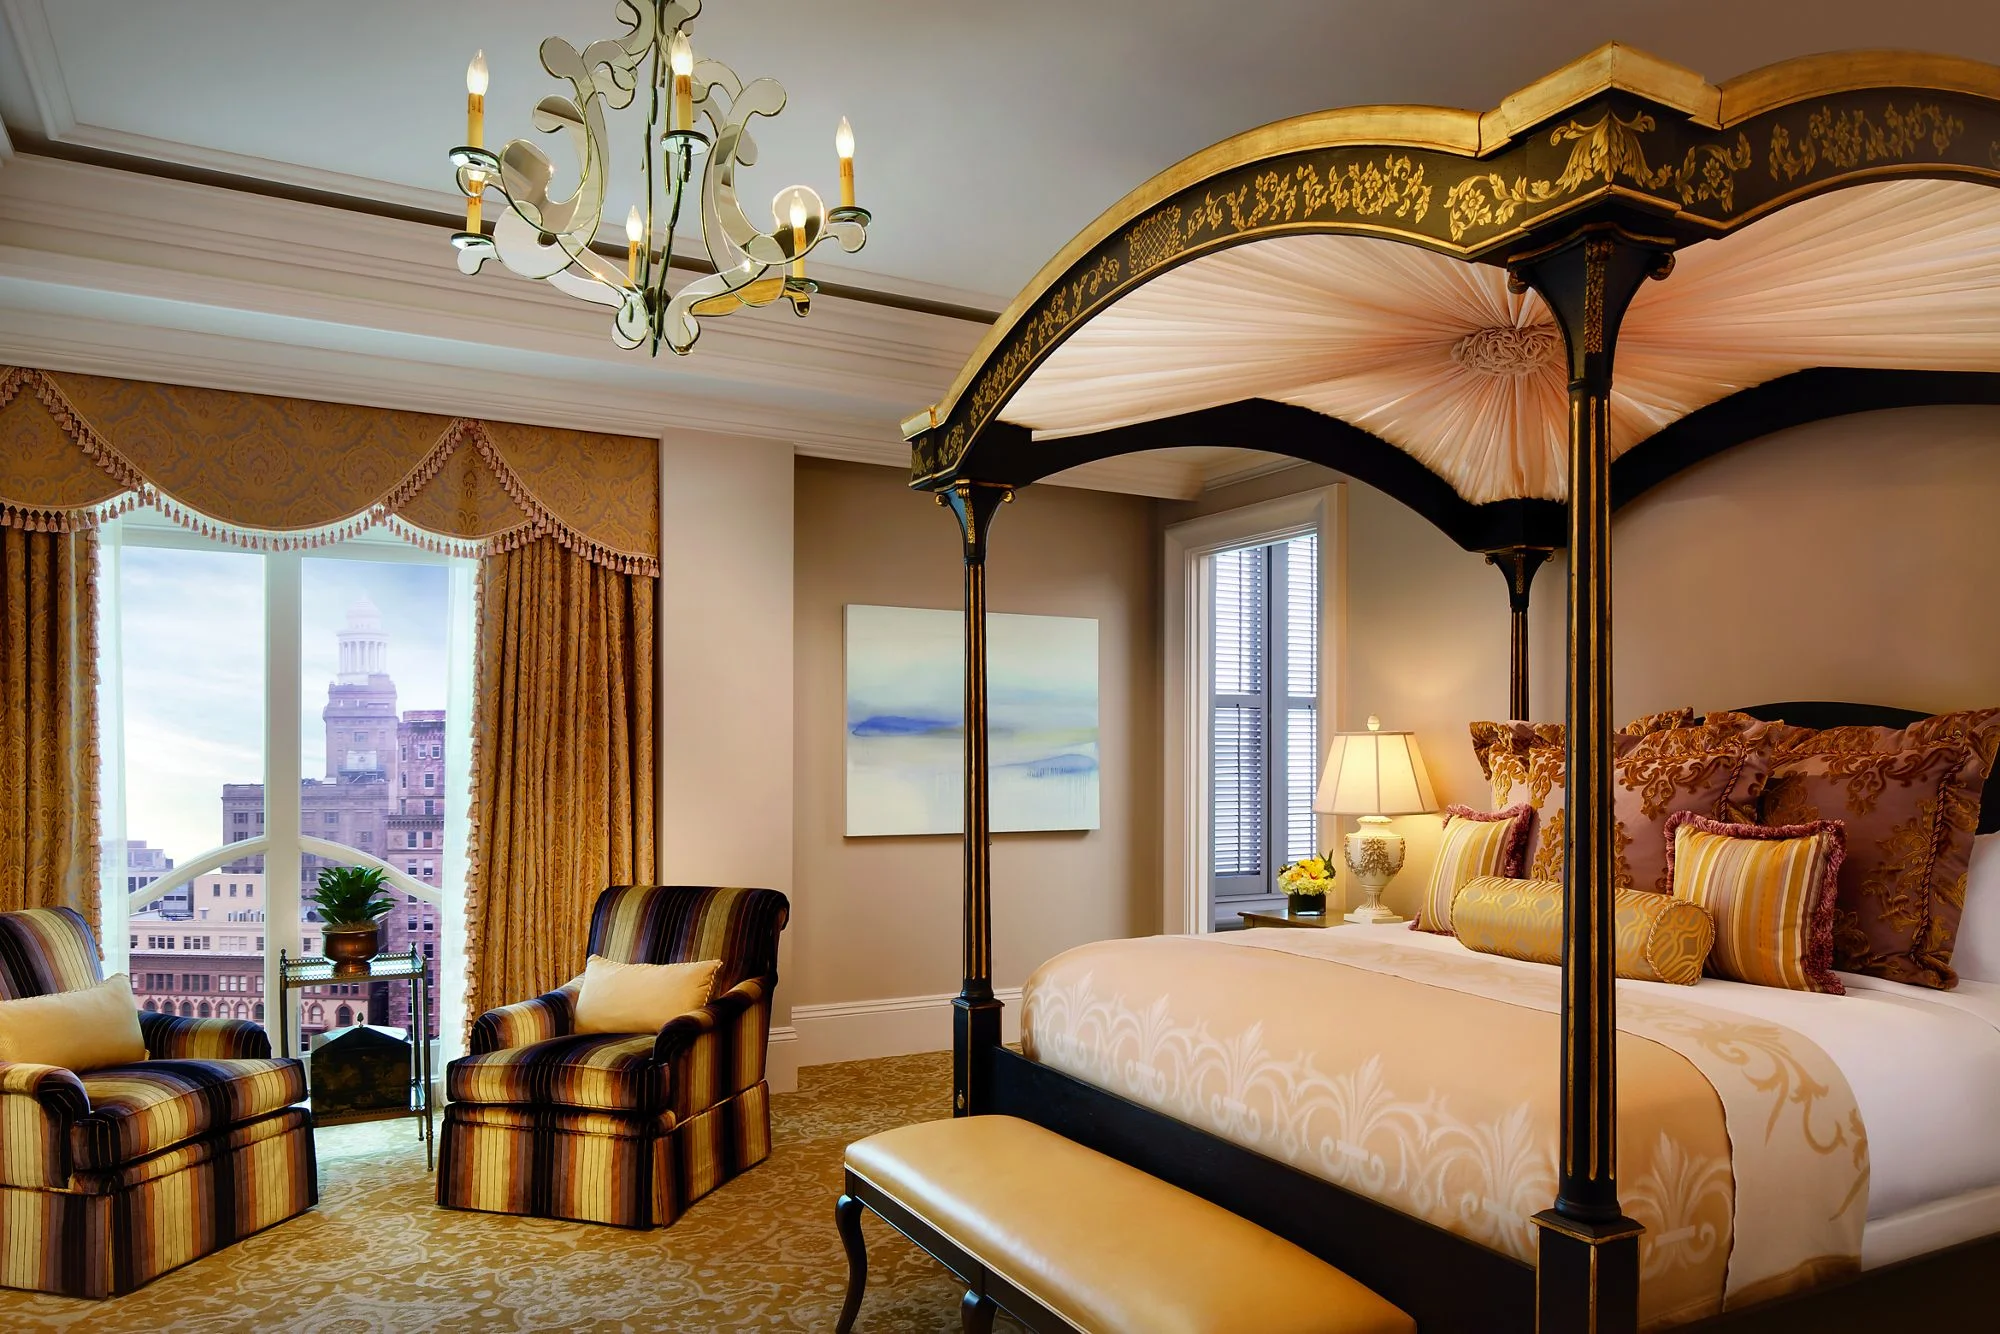 A memorable hotel in New Orleans:  The Ritz-Carlton